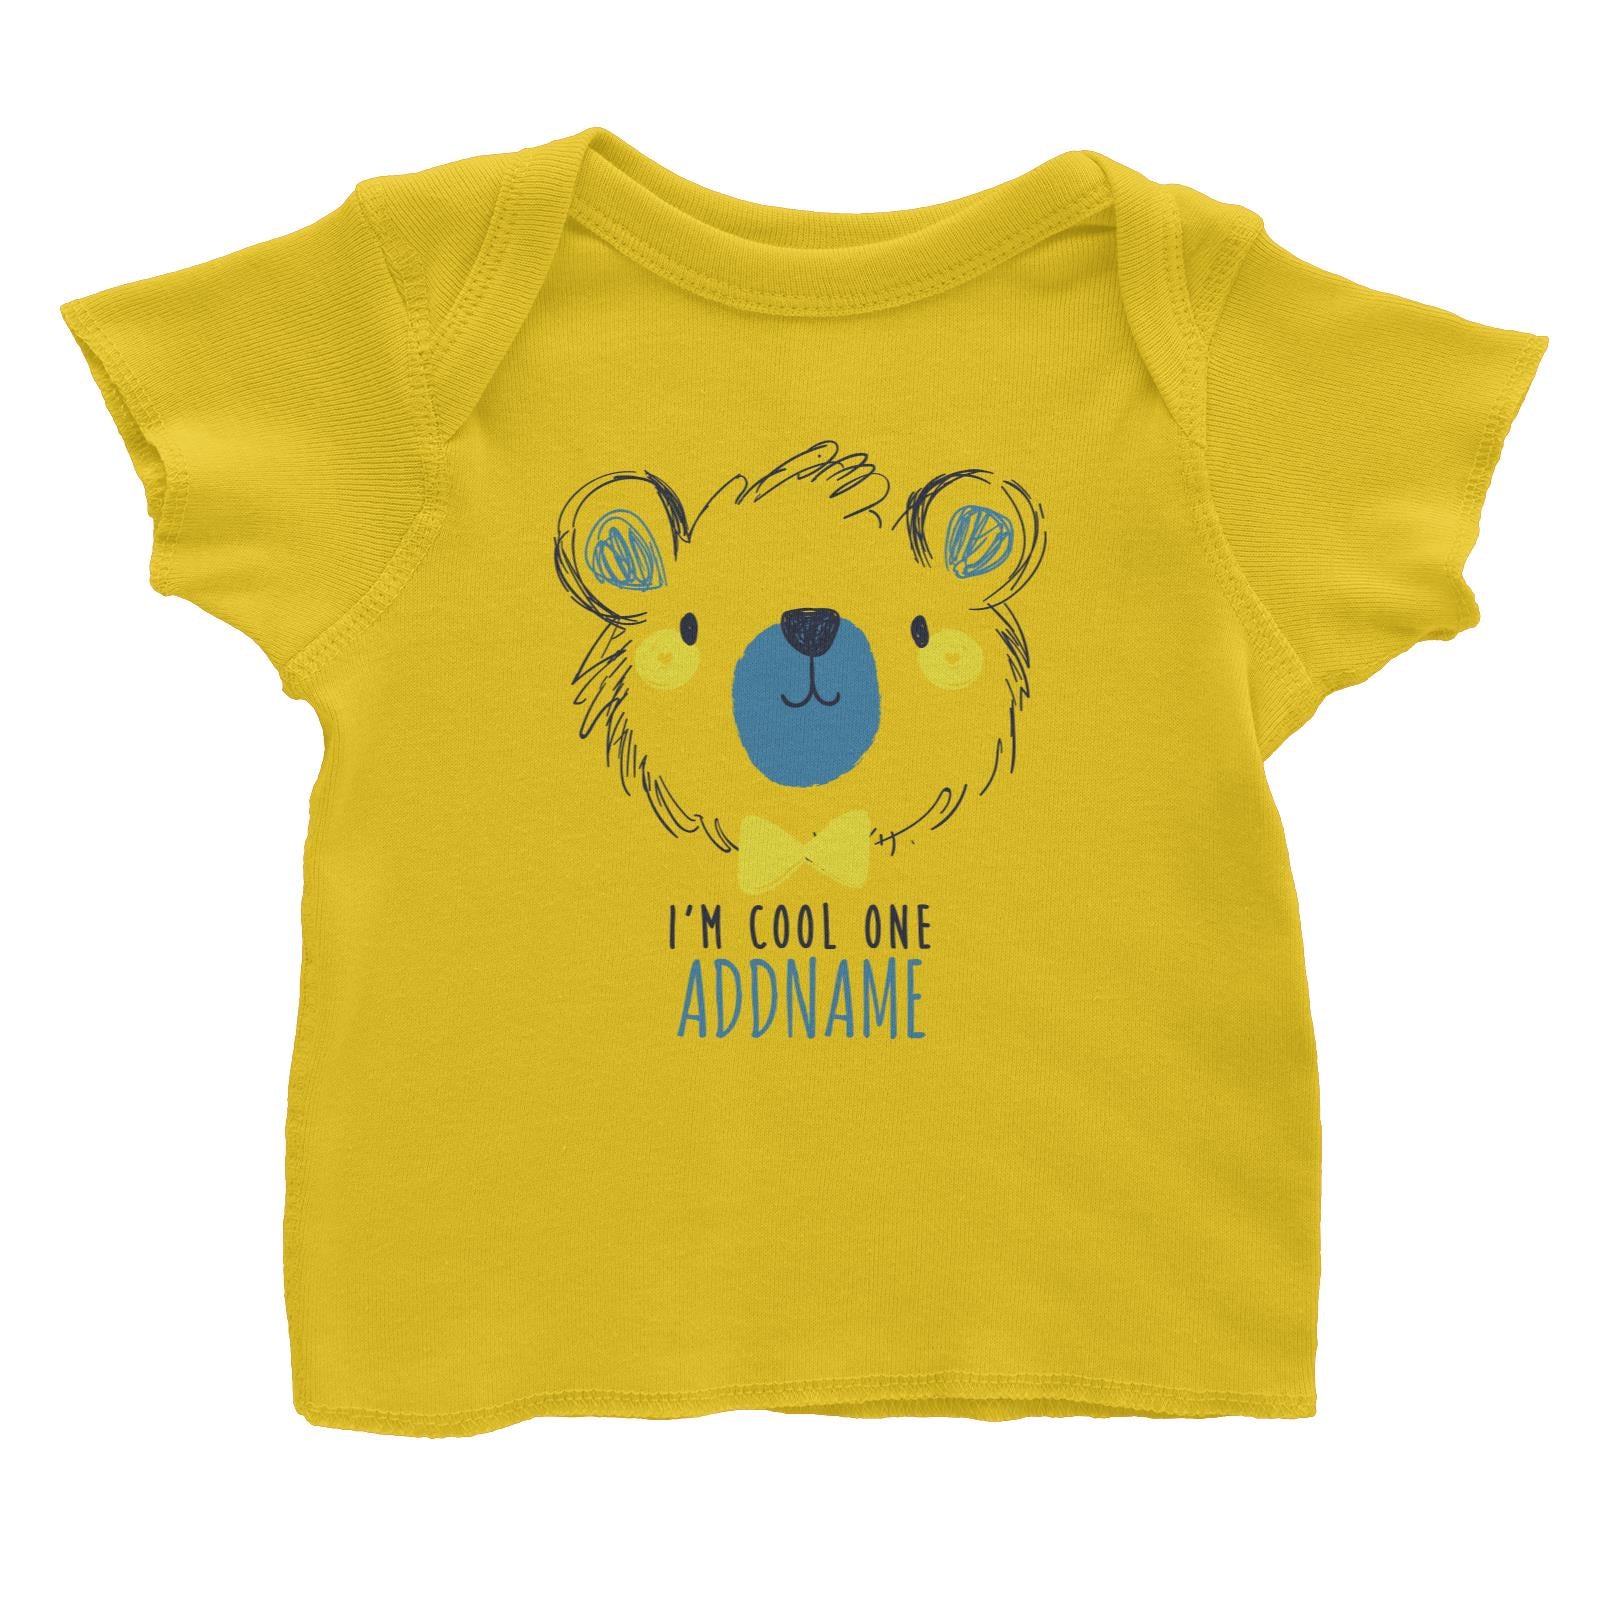 I'm Cool One Bear Addname Baby T-Shirt